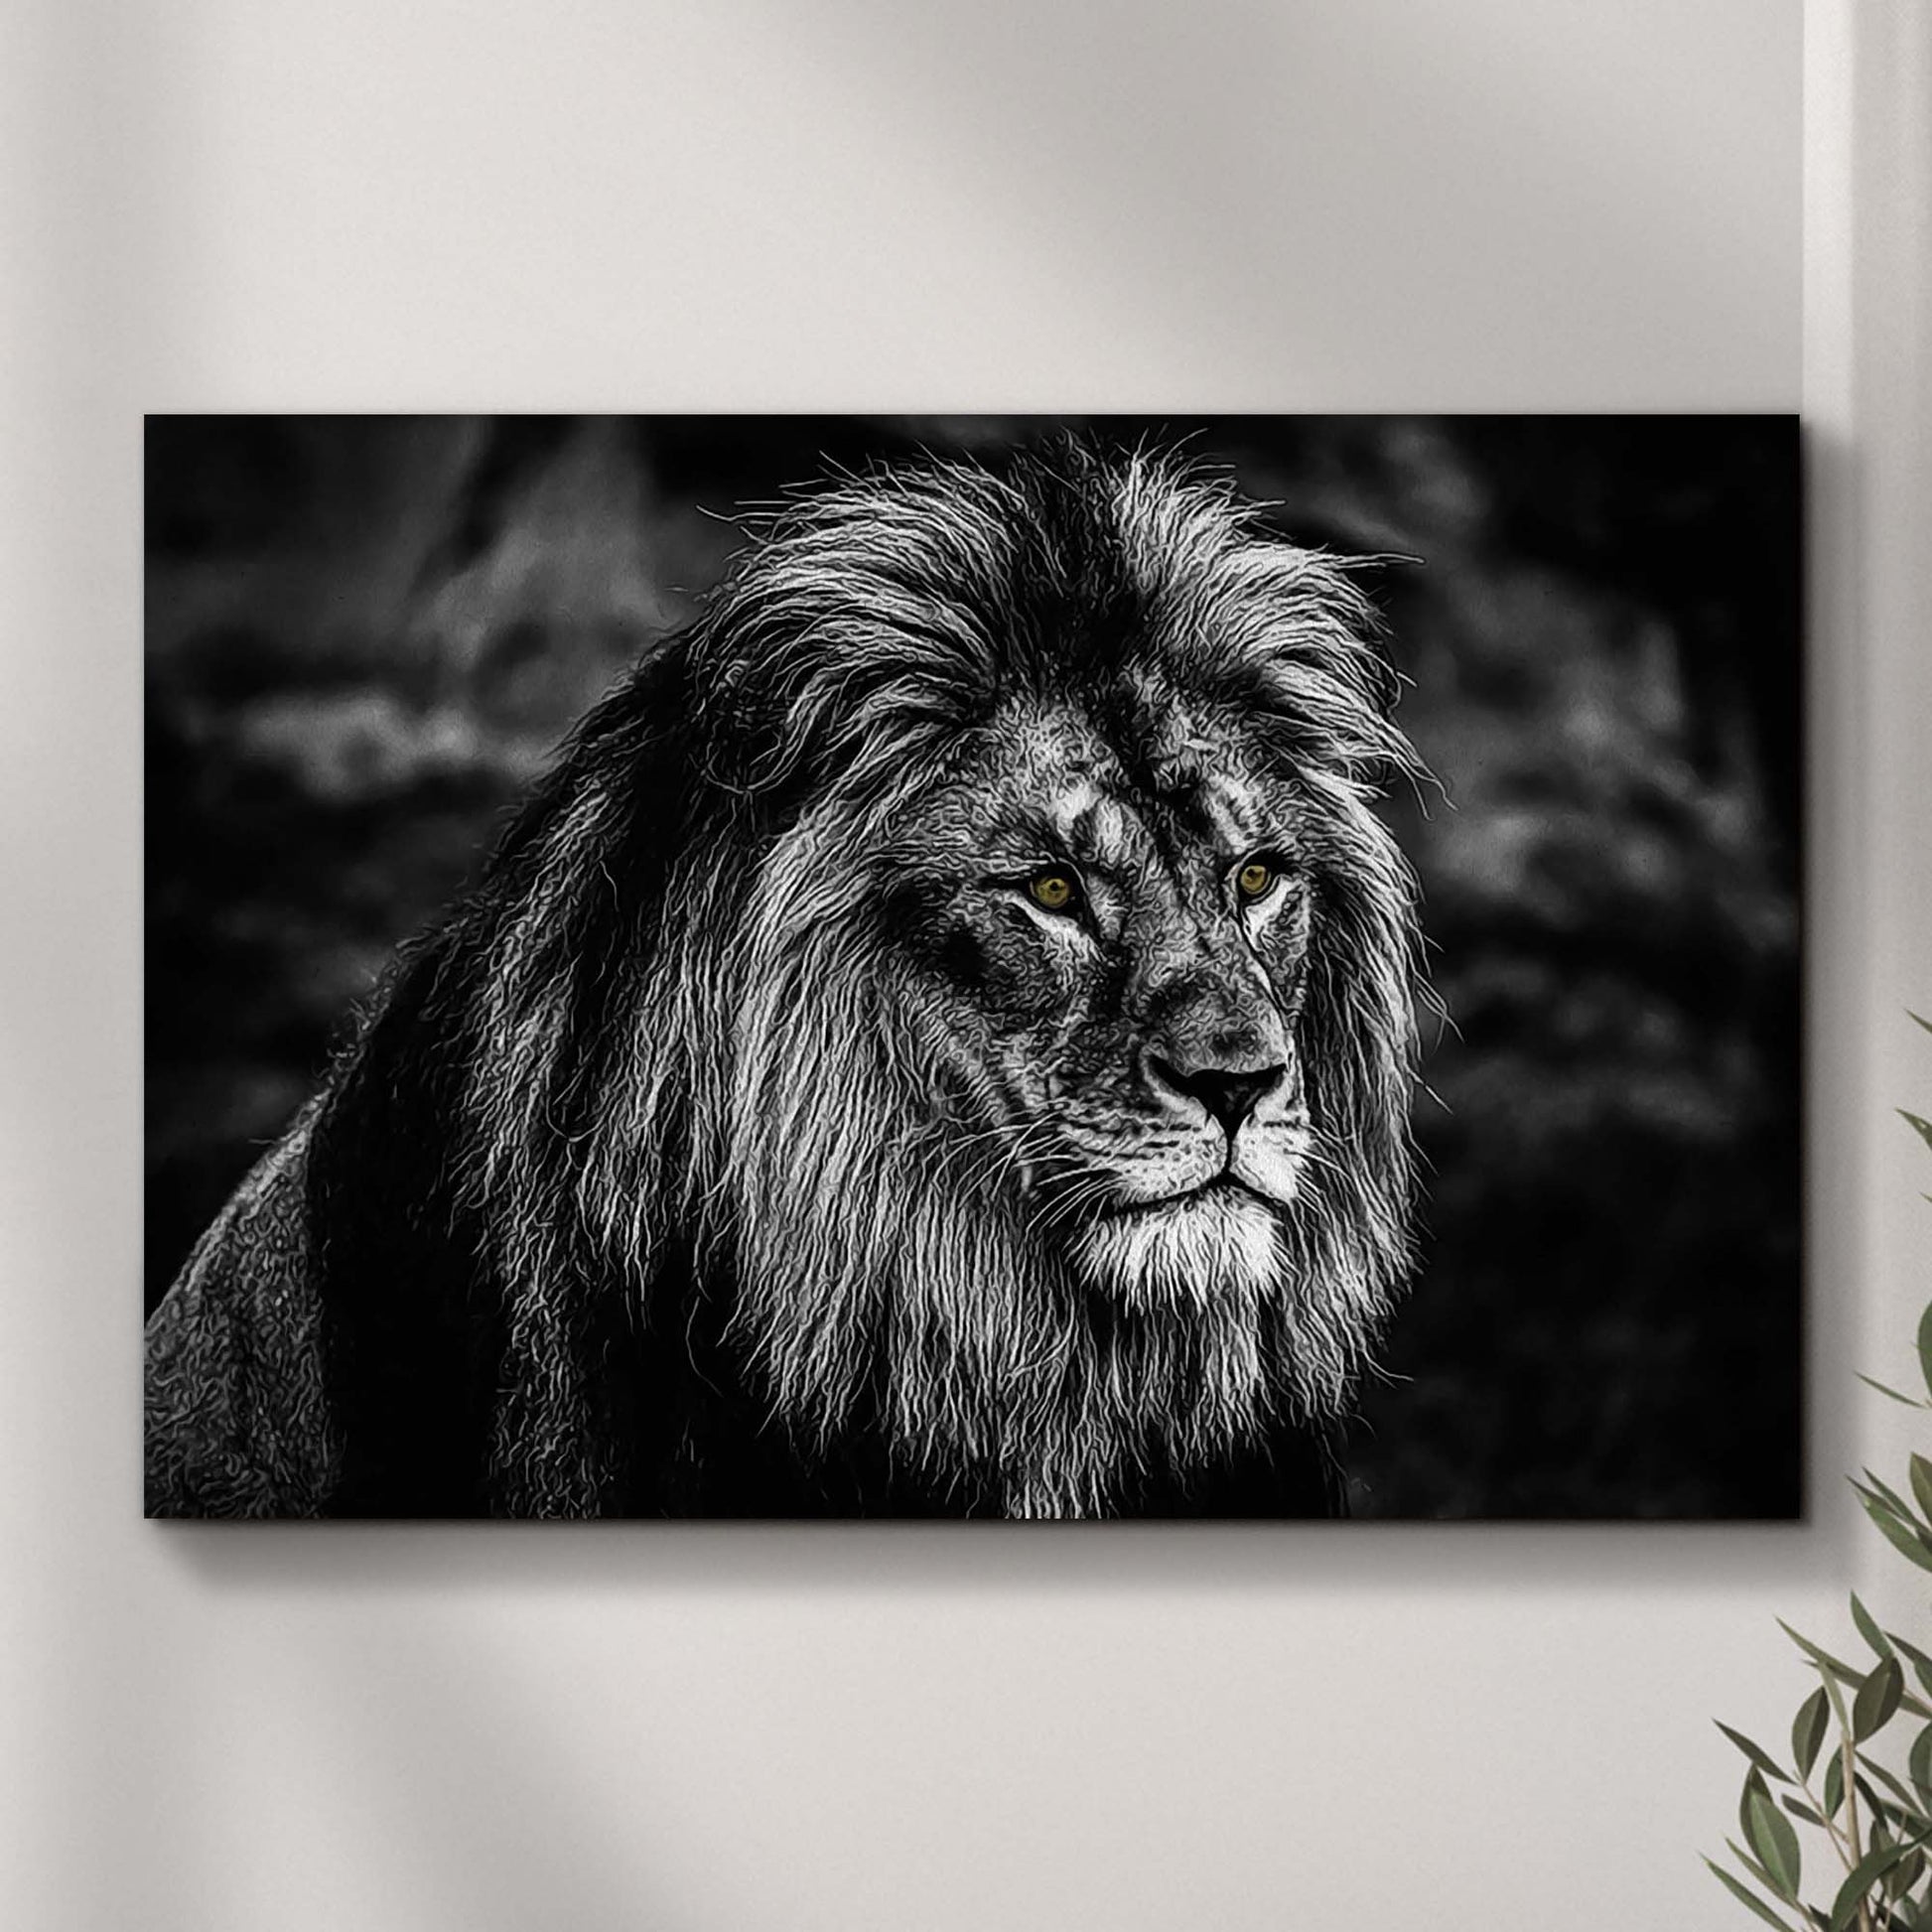 Black and White Golden-Eyed Lion Canvas Wall Art Style 1 - Image by Tailored Canvases